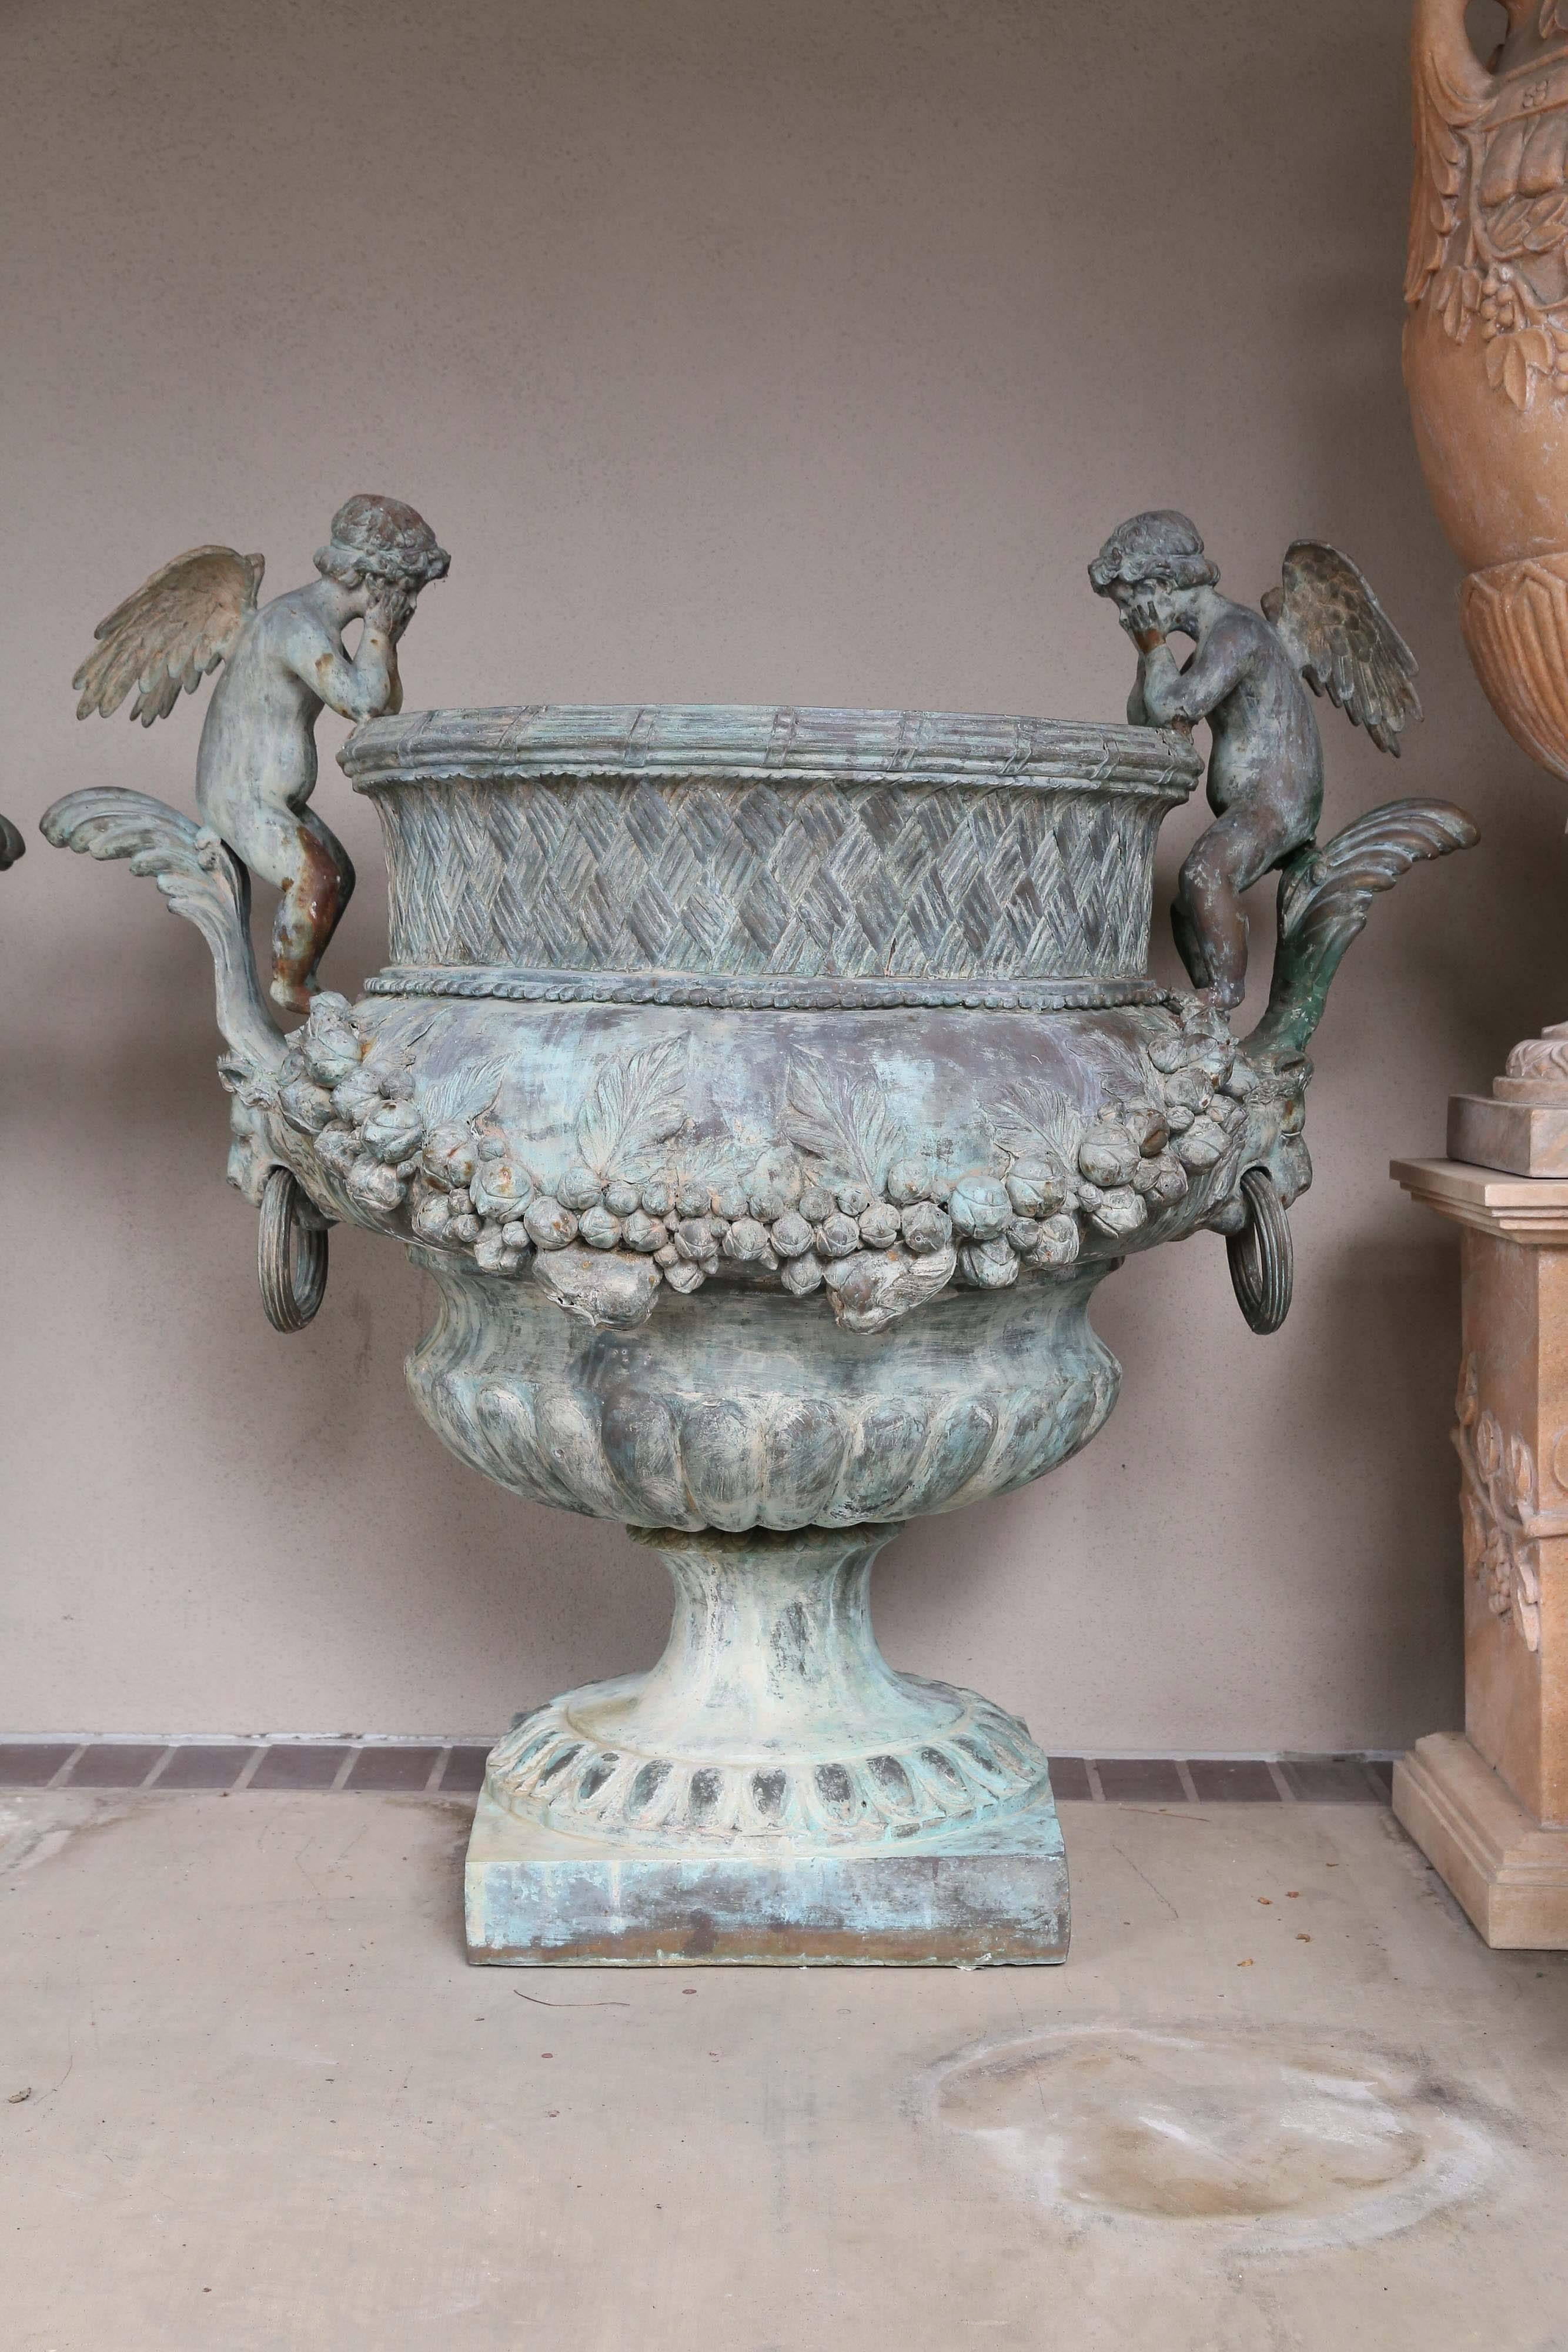 Grand scale planters made of bronze in a verde patina. Winged angels 
Sit along each side facing inward. A foliate garland drapes the main body
of the planters. Vintage with just the right amount of aging.